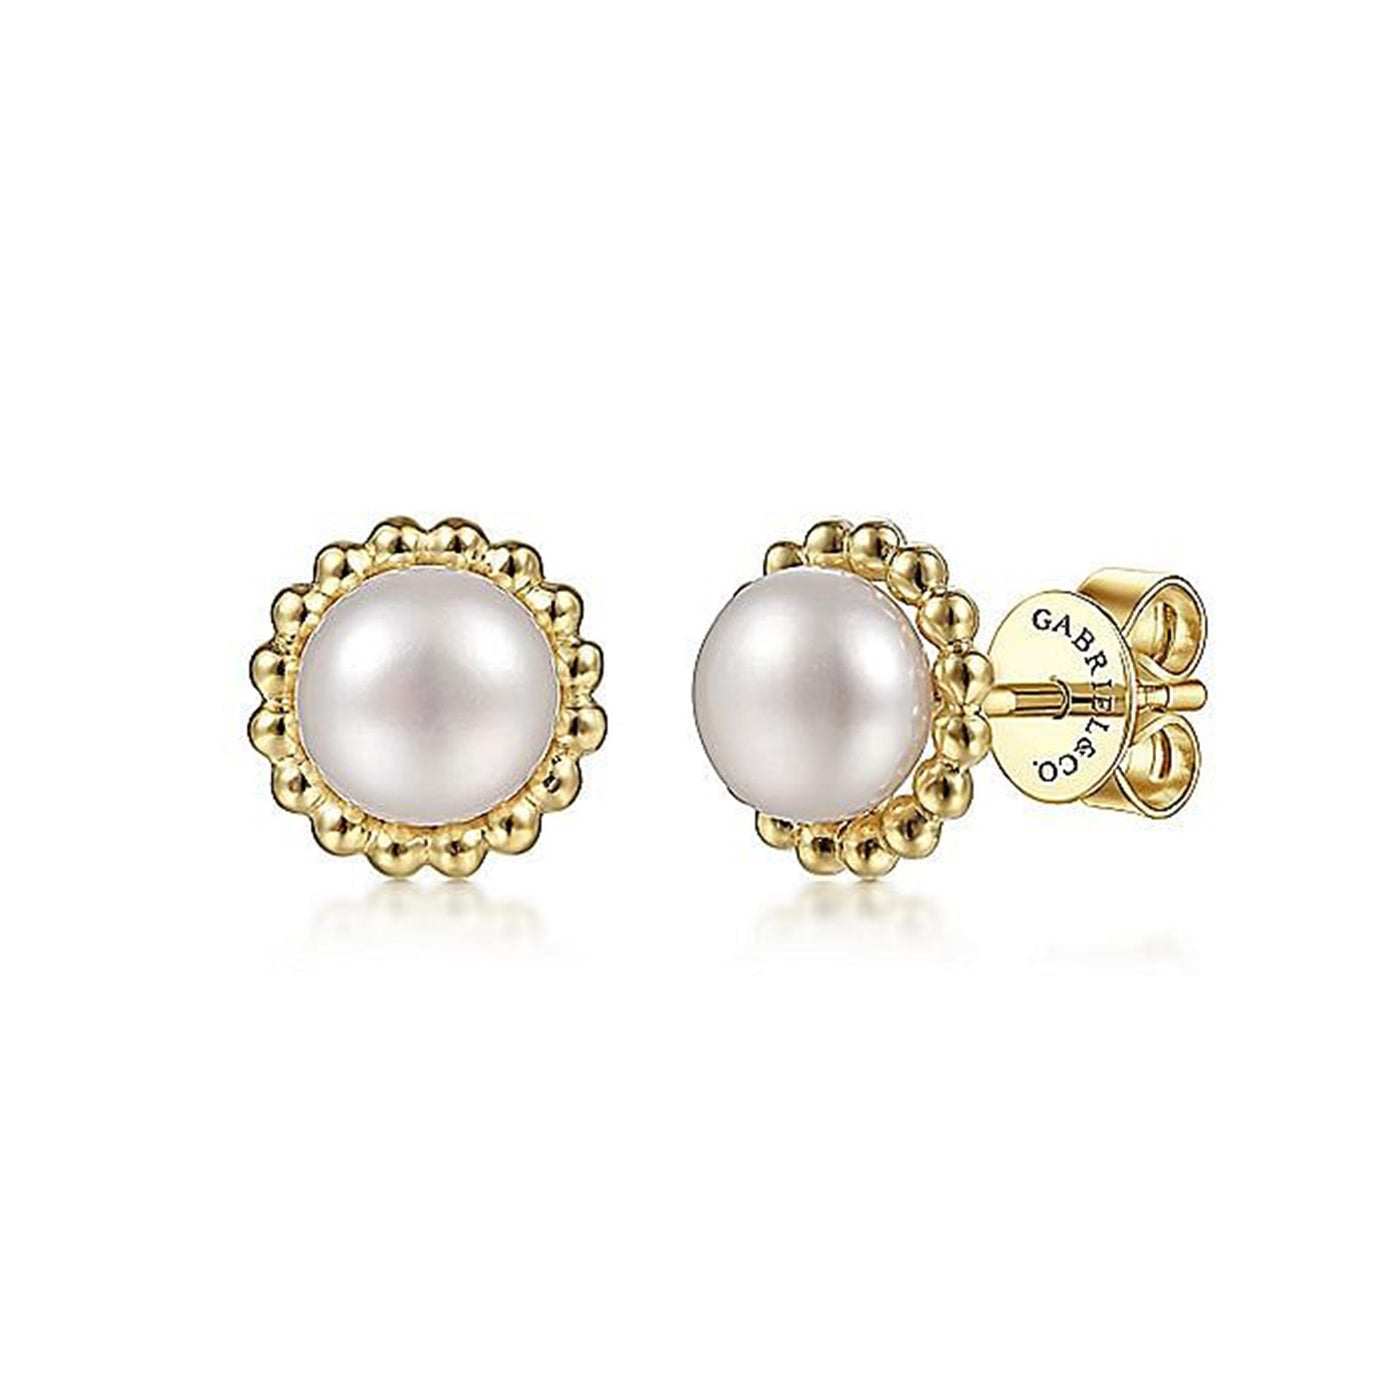 Gabriel 14K Yellow Gold Halo Style Earrings Featuring Freshwater Pearls